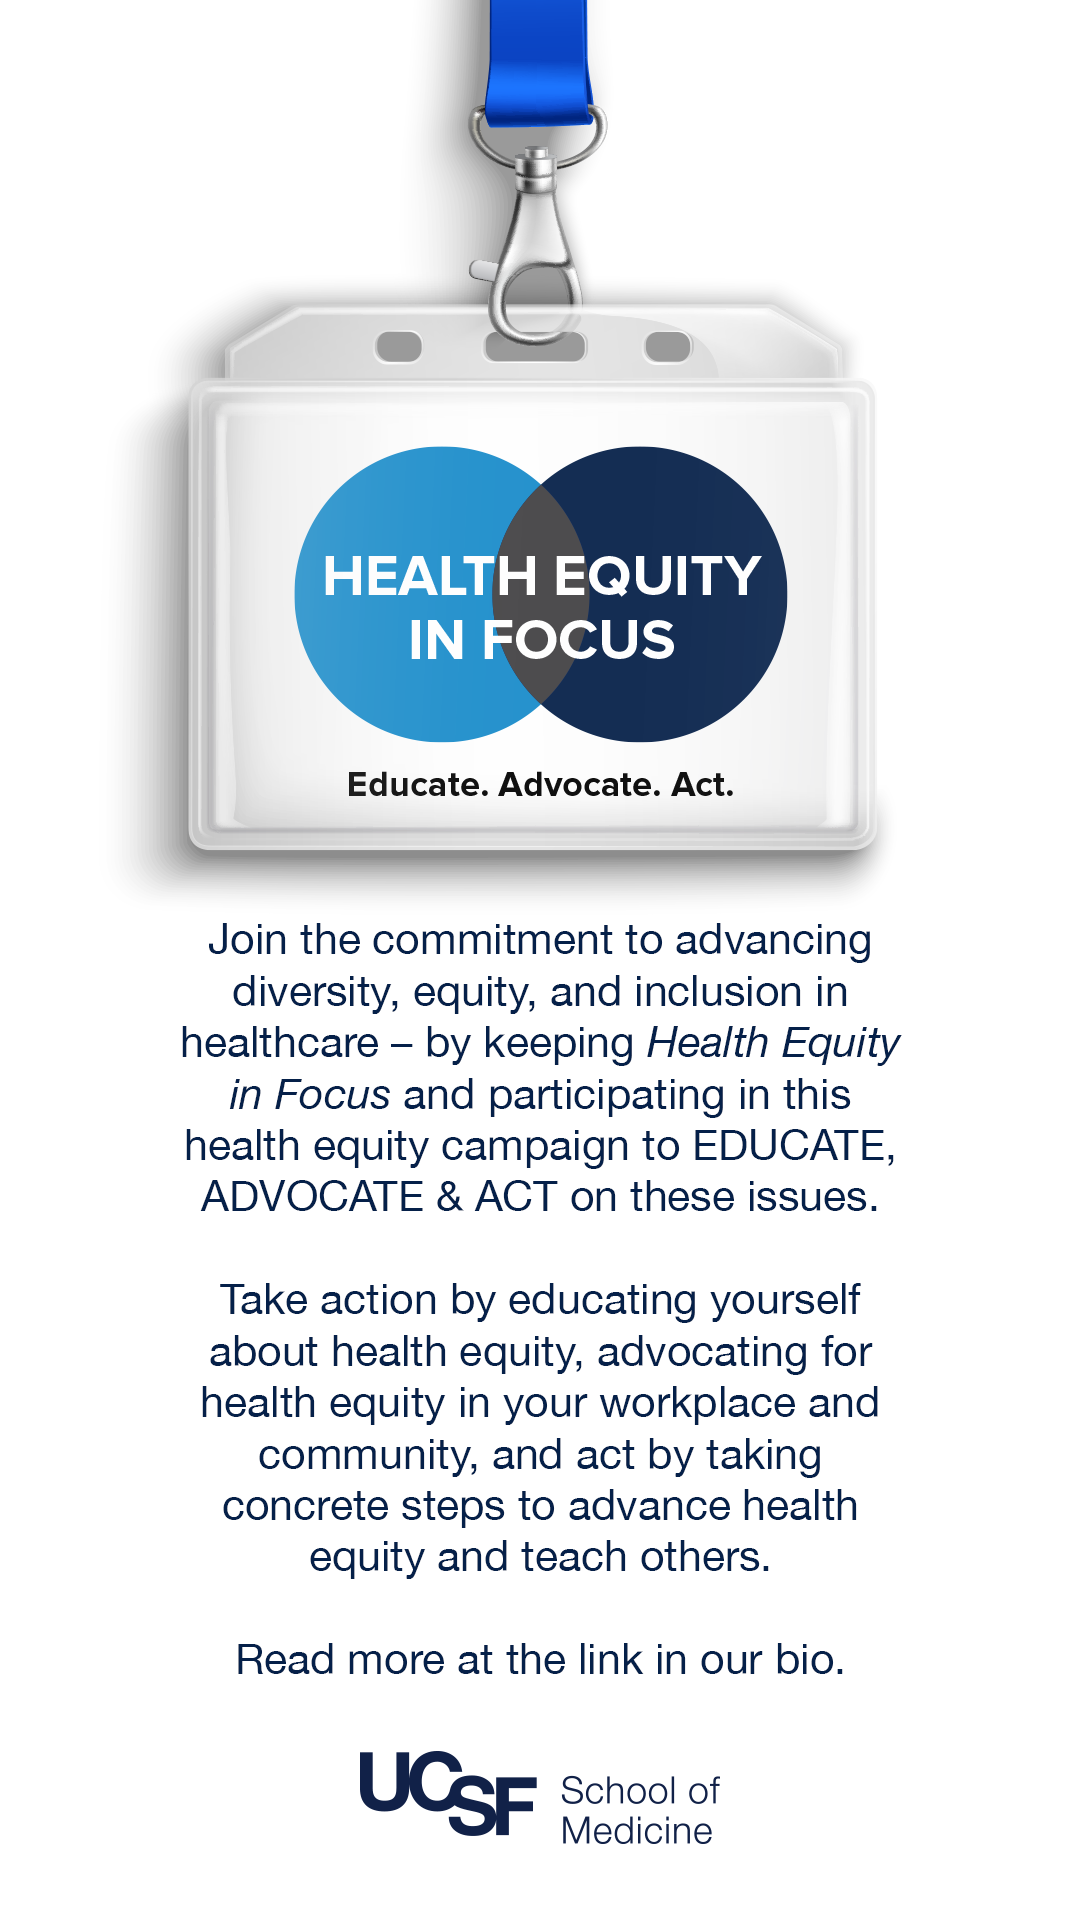 image of health equity in focus badge for instagram story